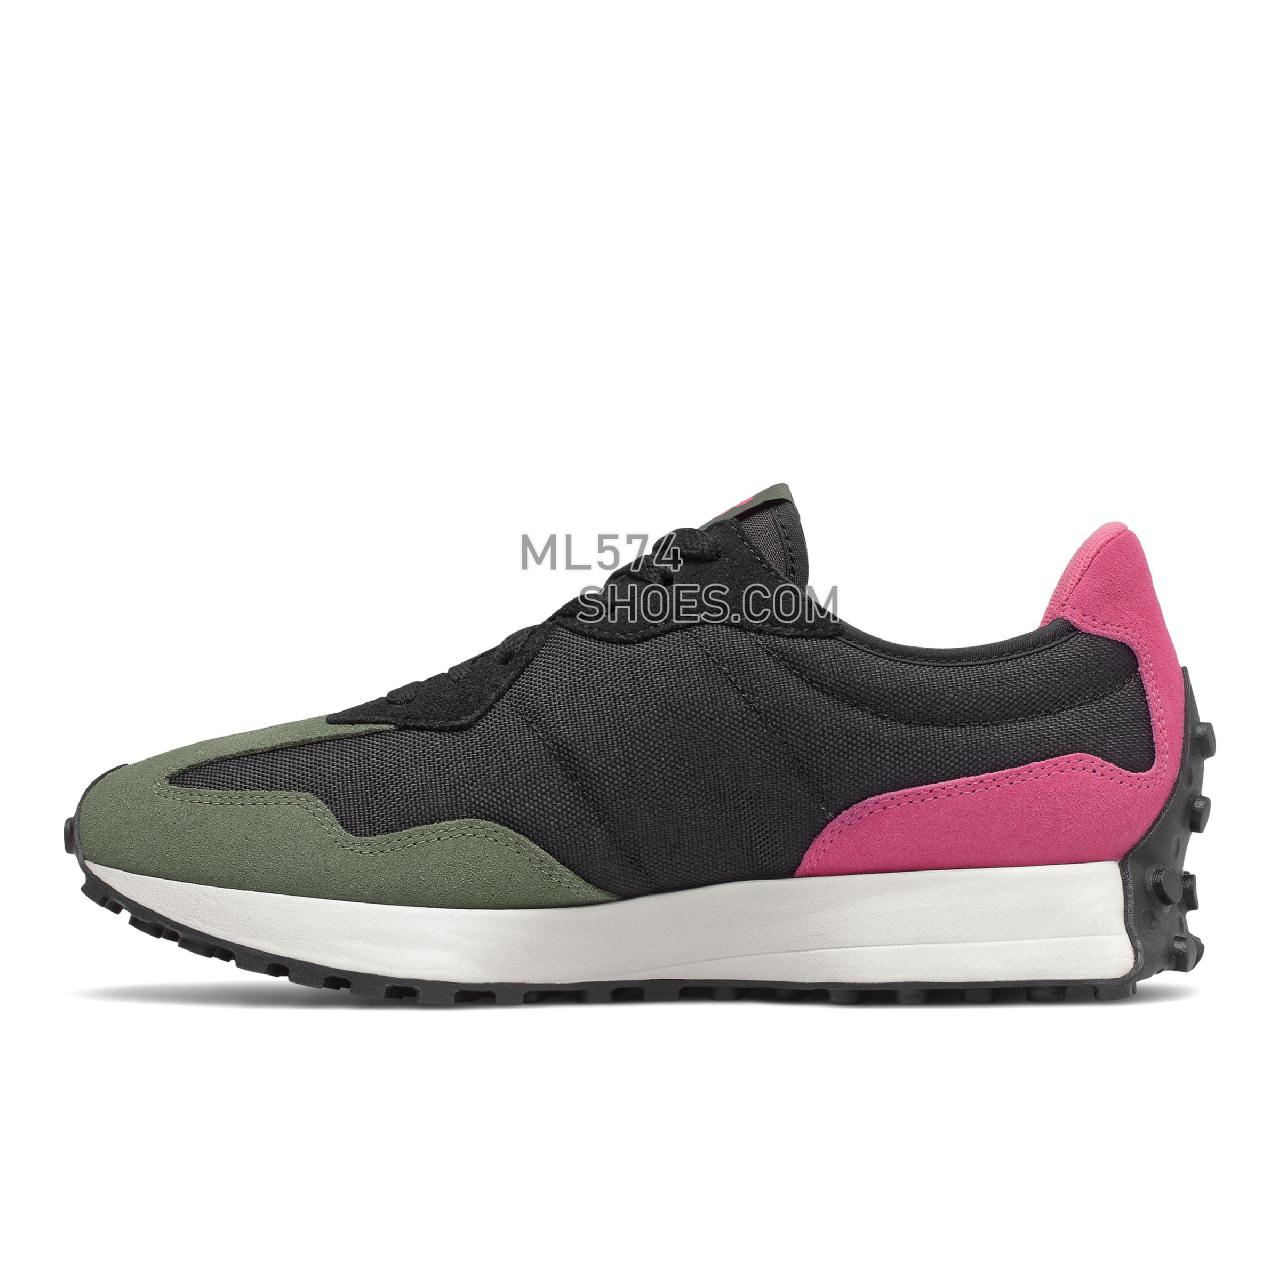 New Balance 327 - Unisex Men's Women's Sport Style Sneakers - Black with Sporty Pink - MS327WR1